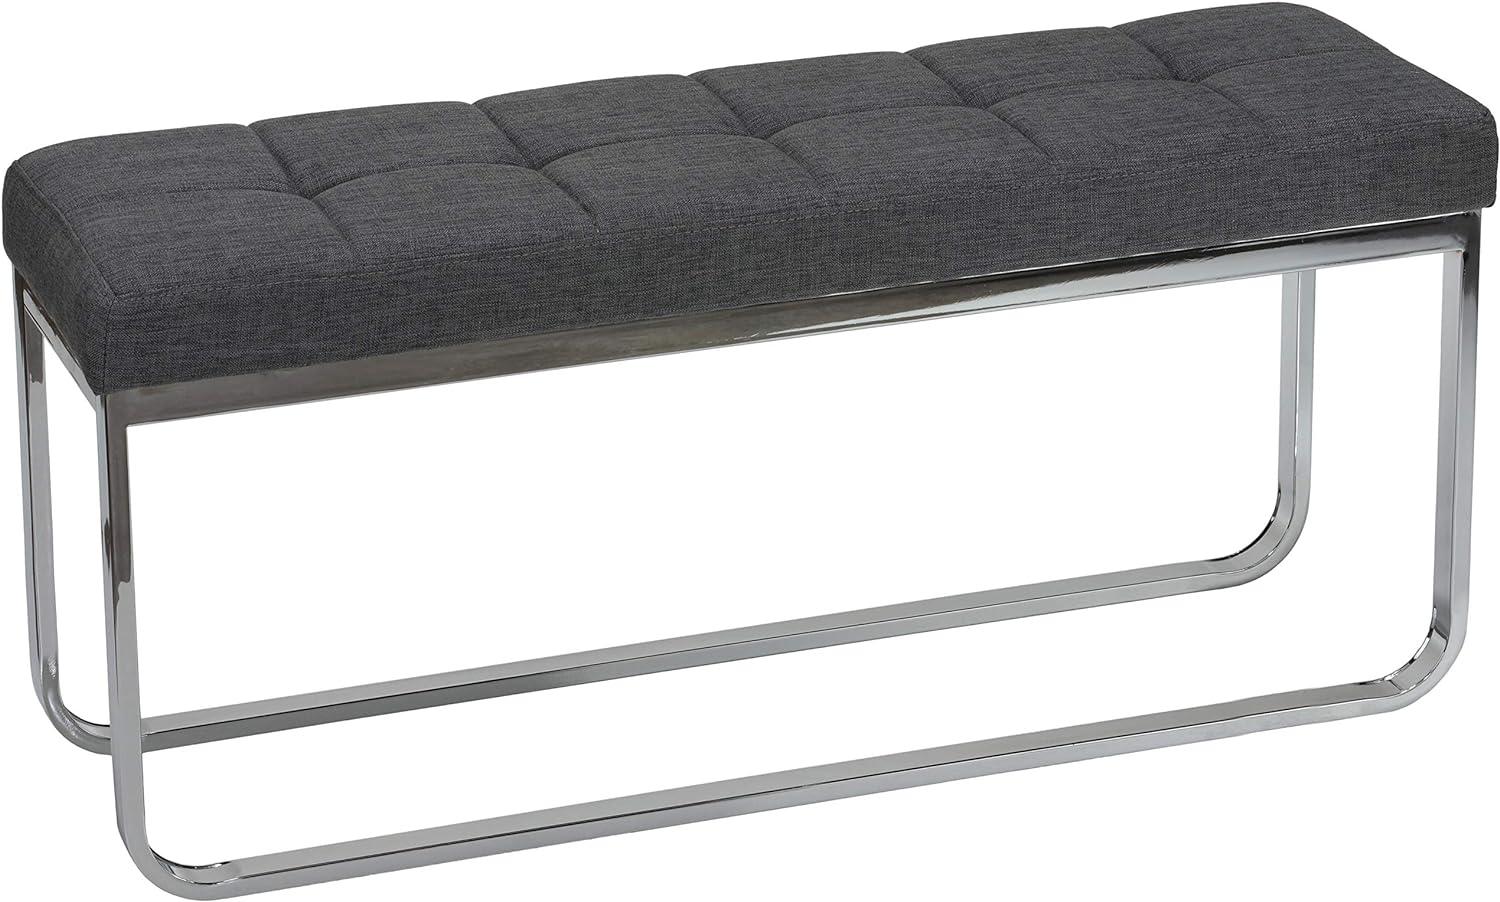 Contemporary Nola Narrow Bench in Grey Linen with Polished Stainless Steel Legs